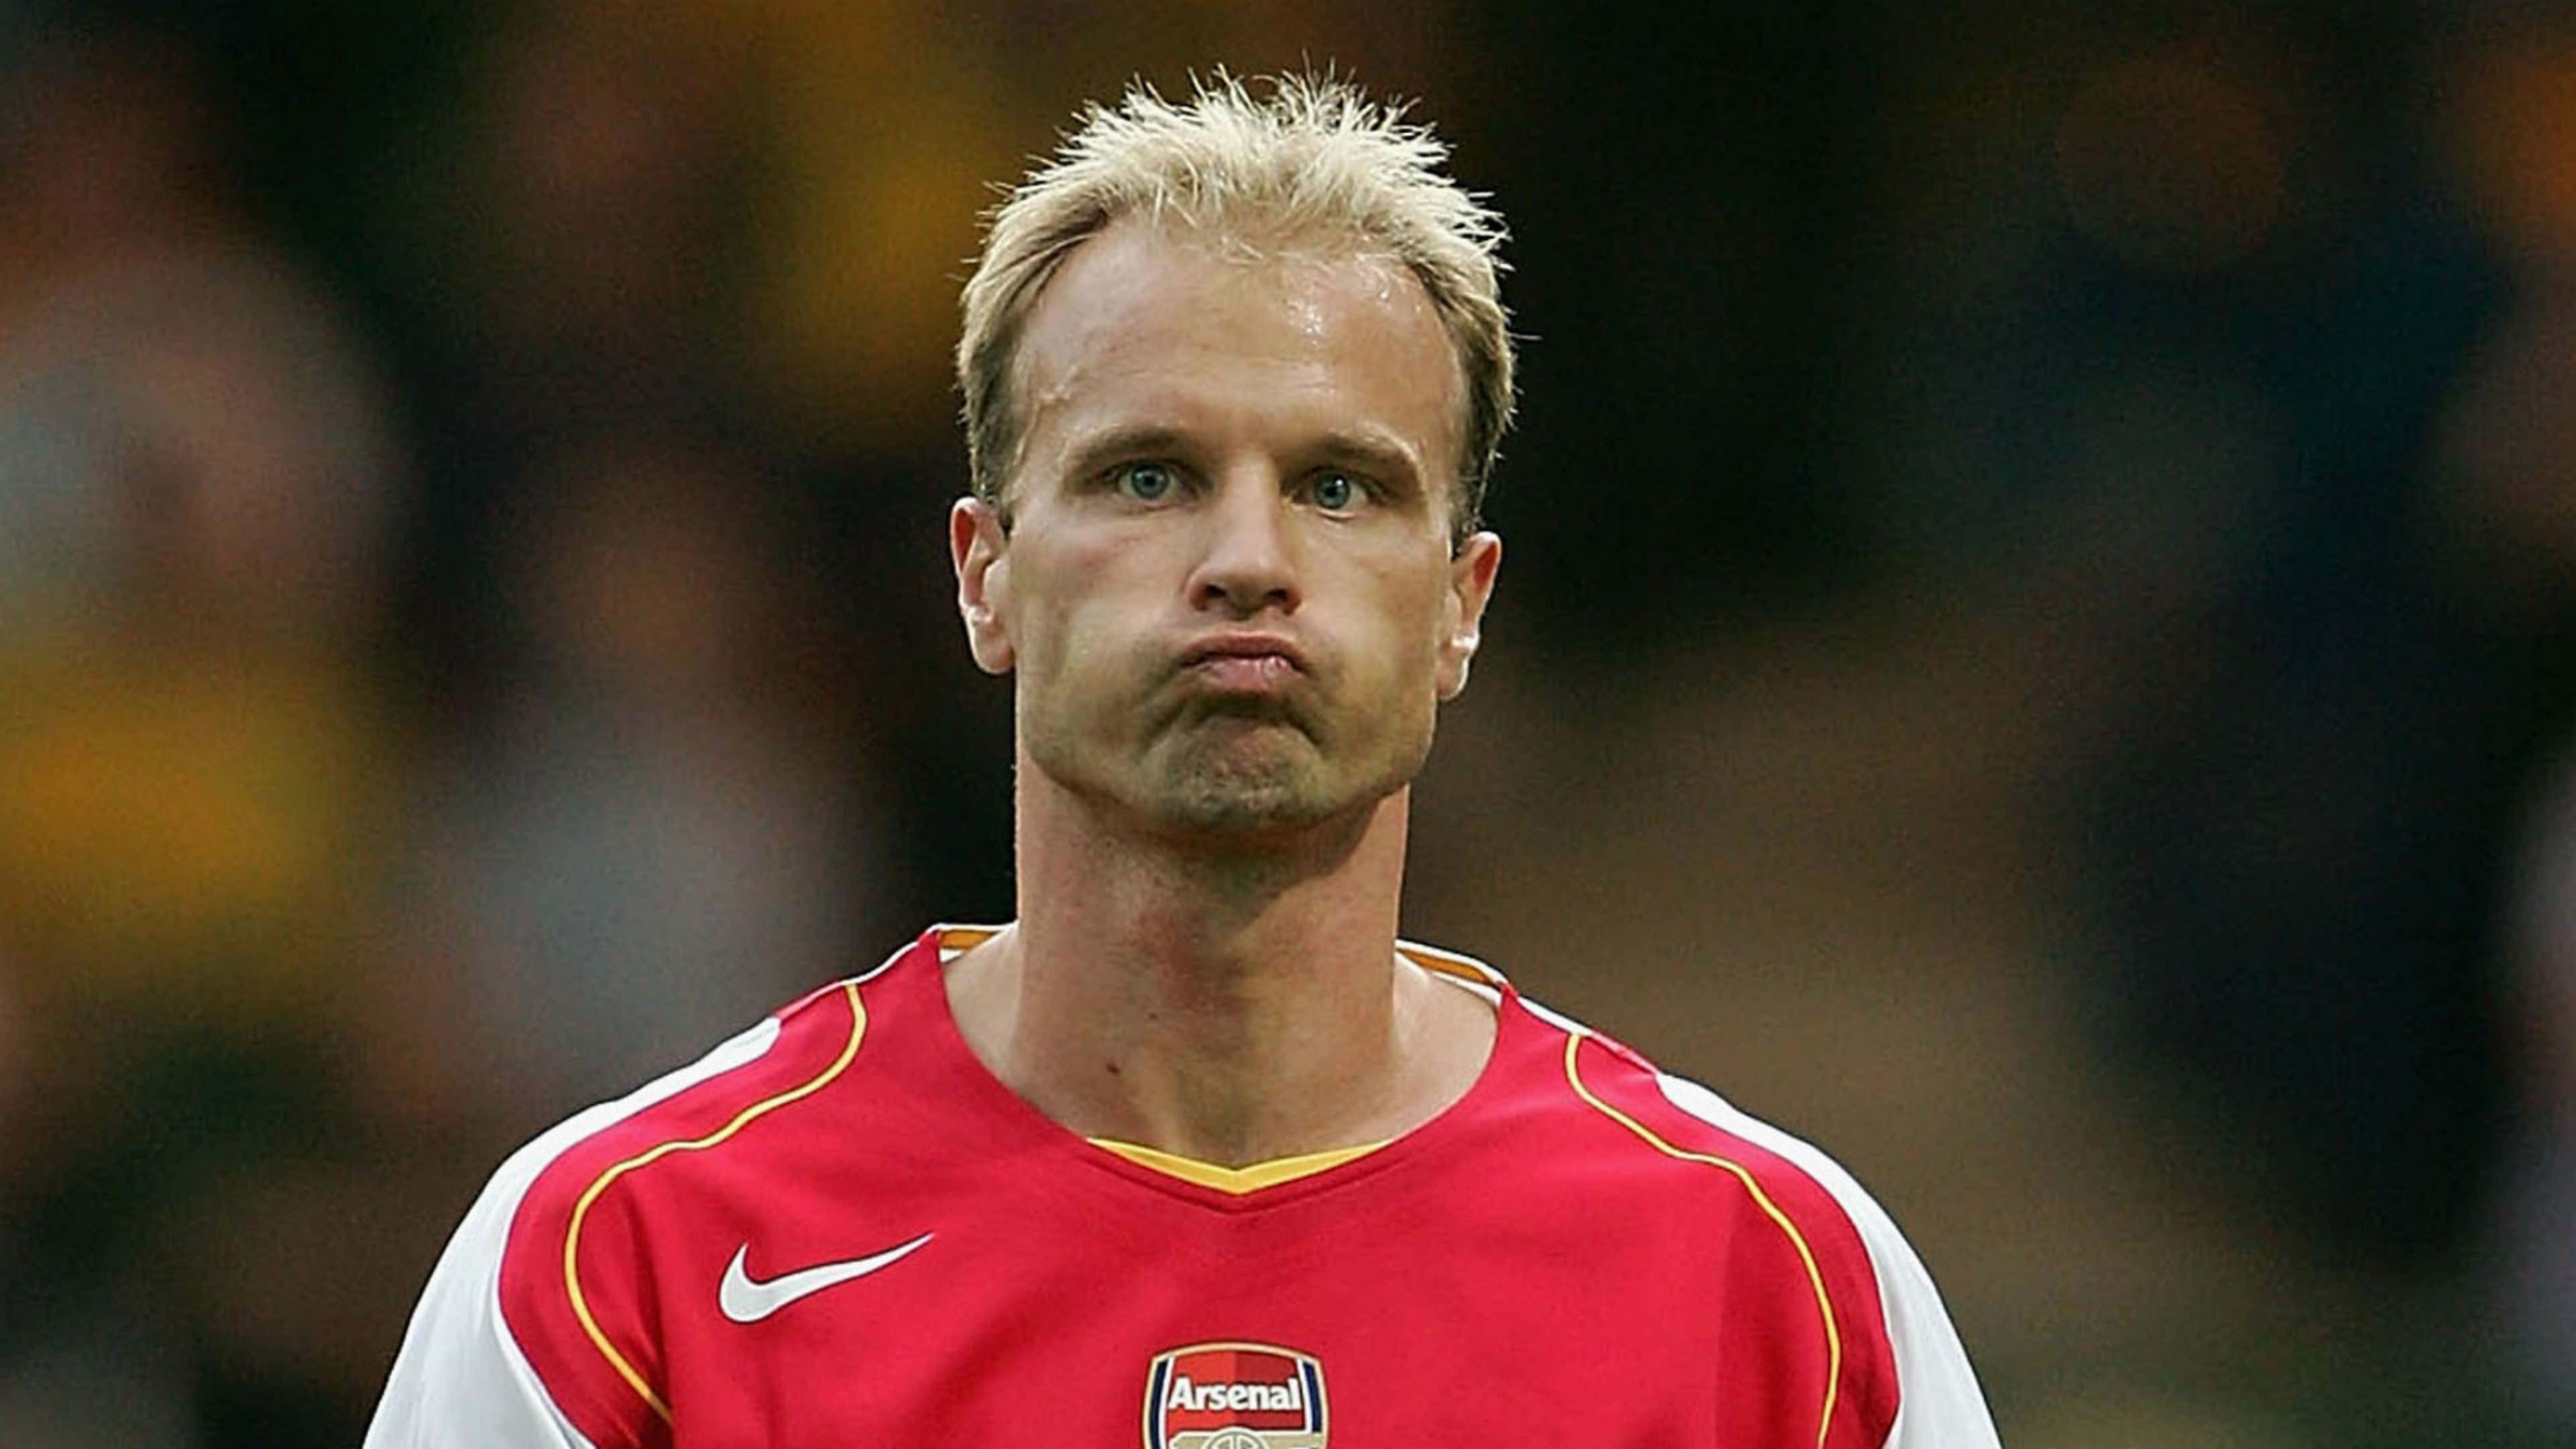  Dennis Bergkamp made his debut for Arsenal in a 3-0 win over Leicester City on 20 August 1995.